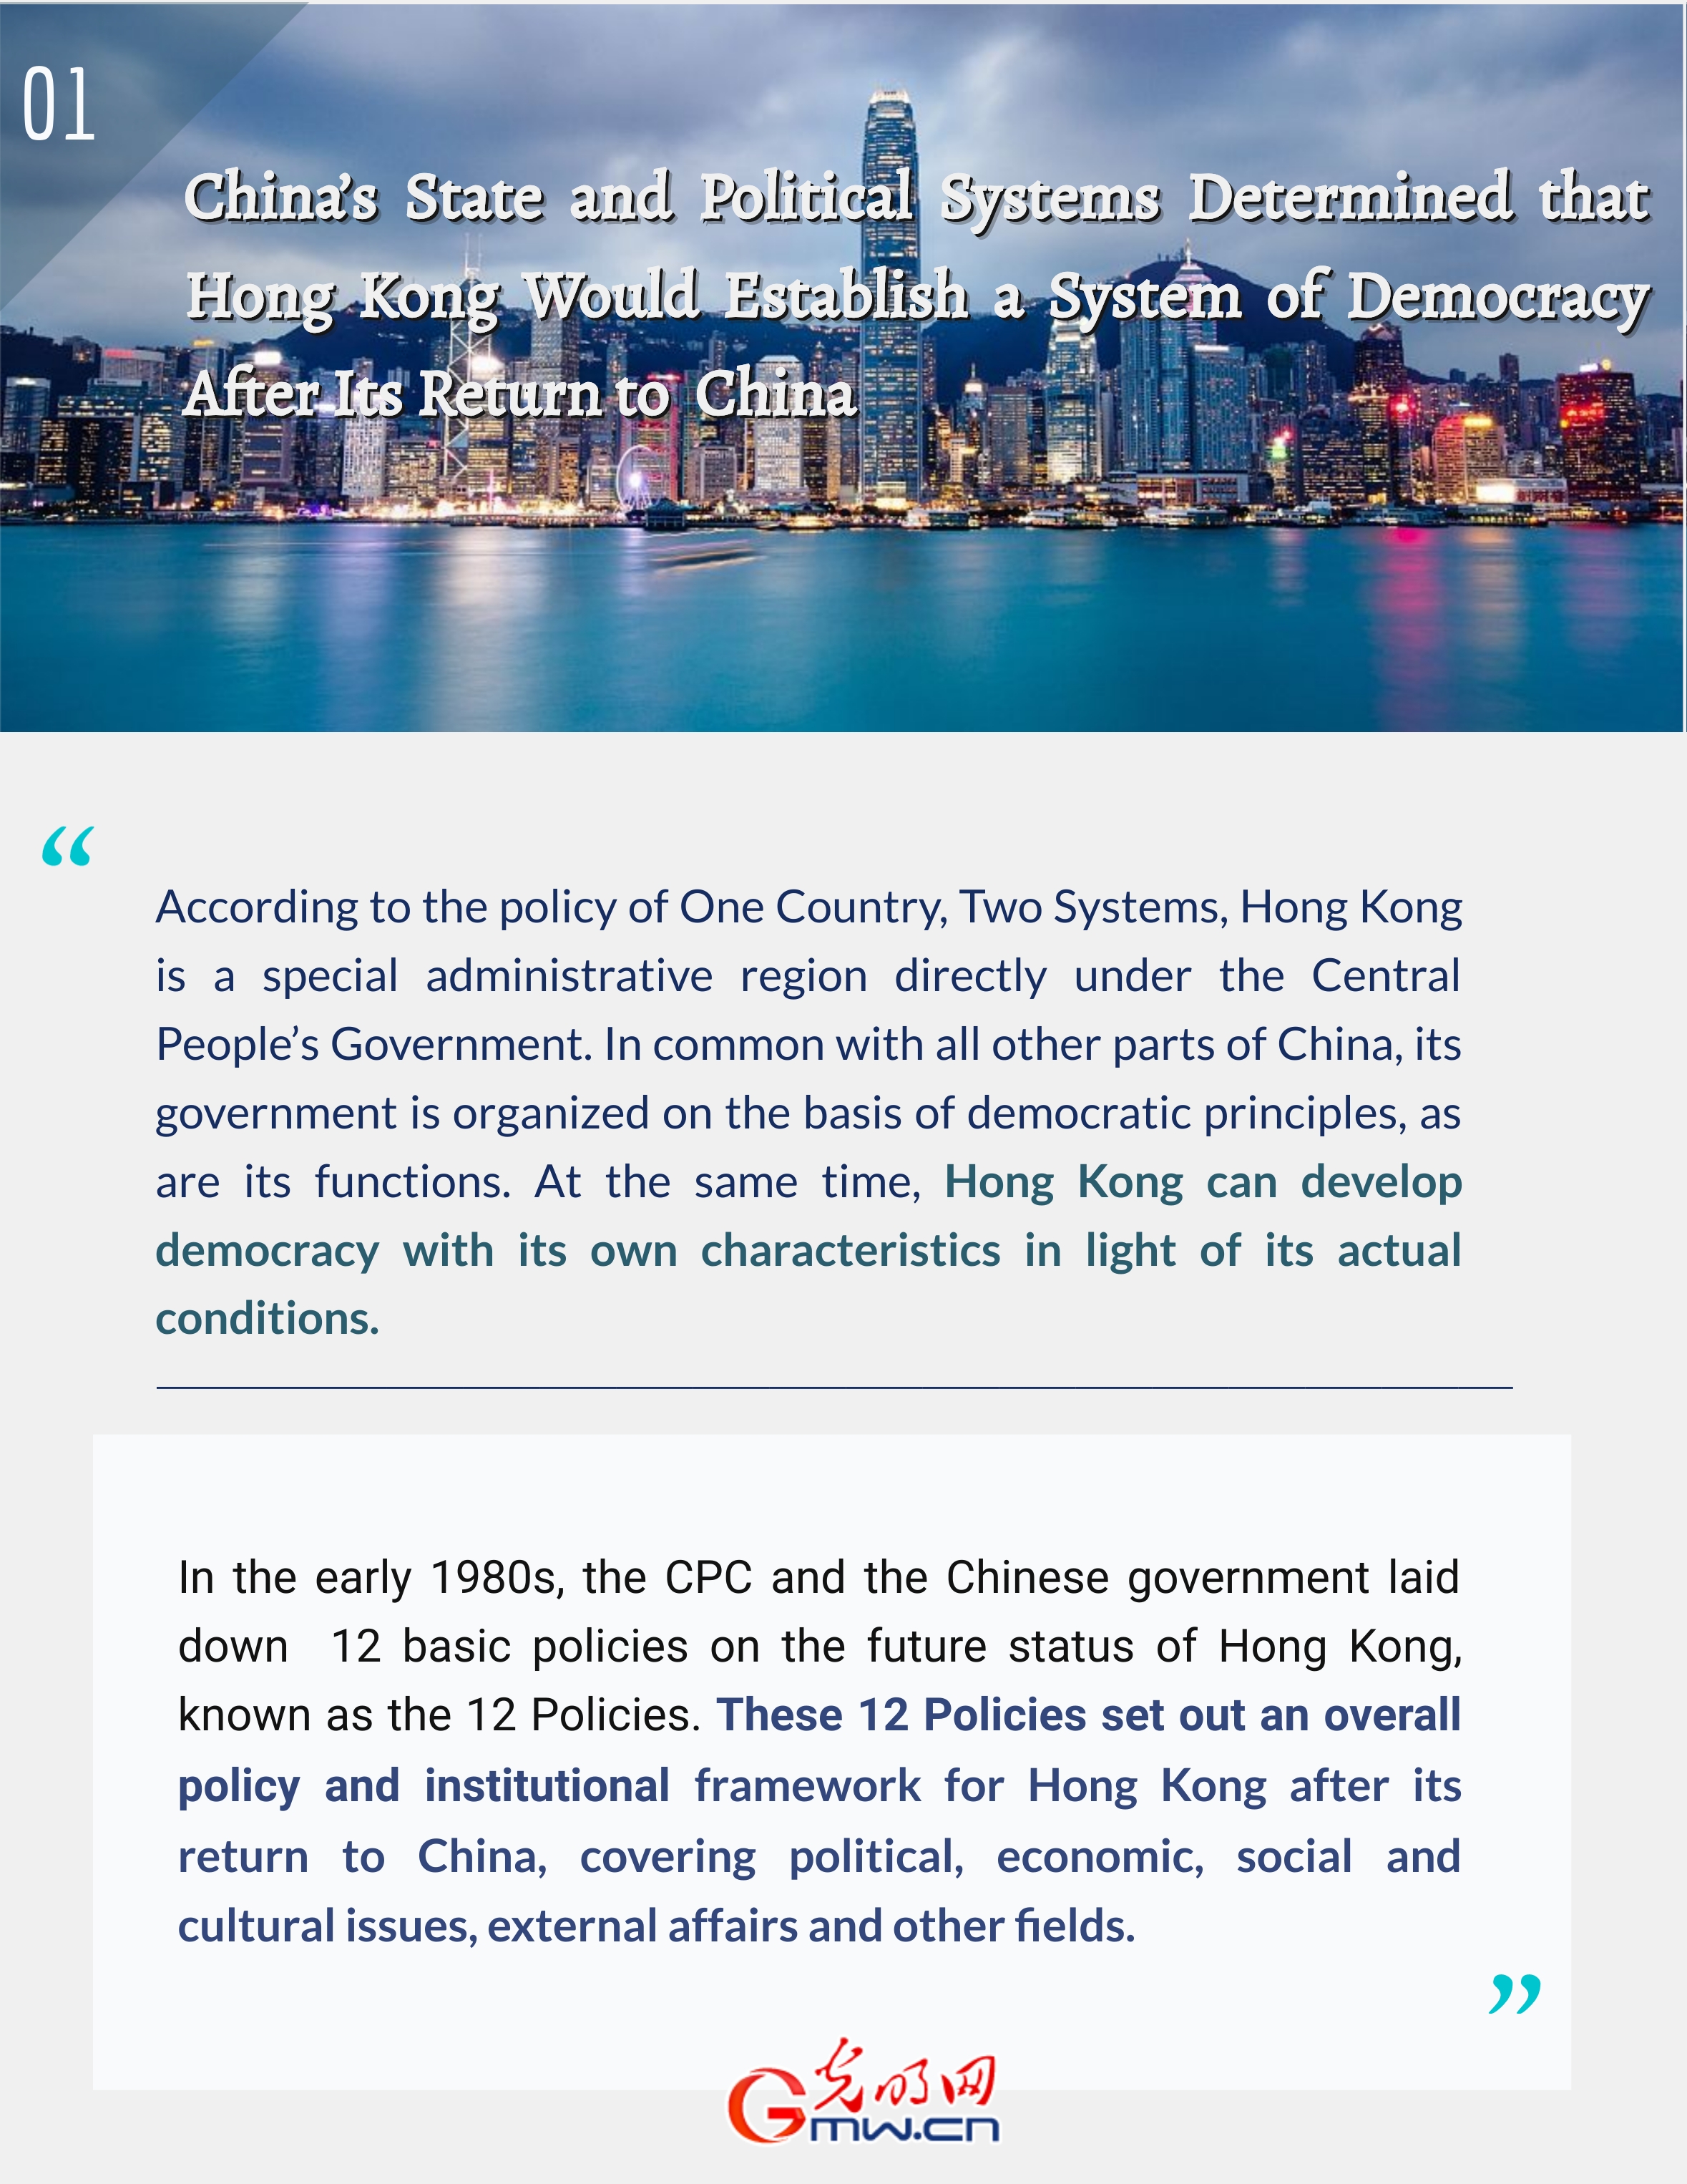 Infographic: the return of Hong Kong to China ushered in a new era for democracy